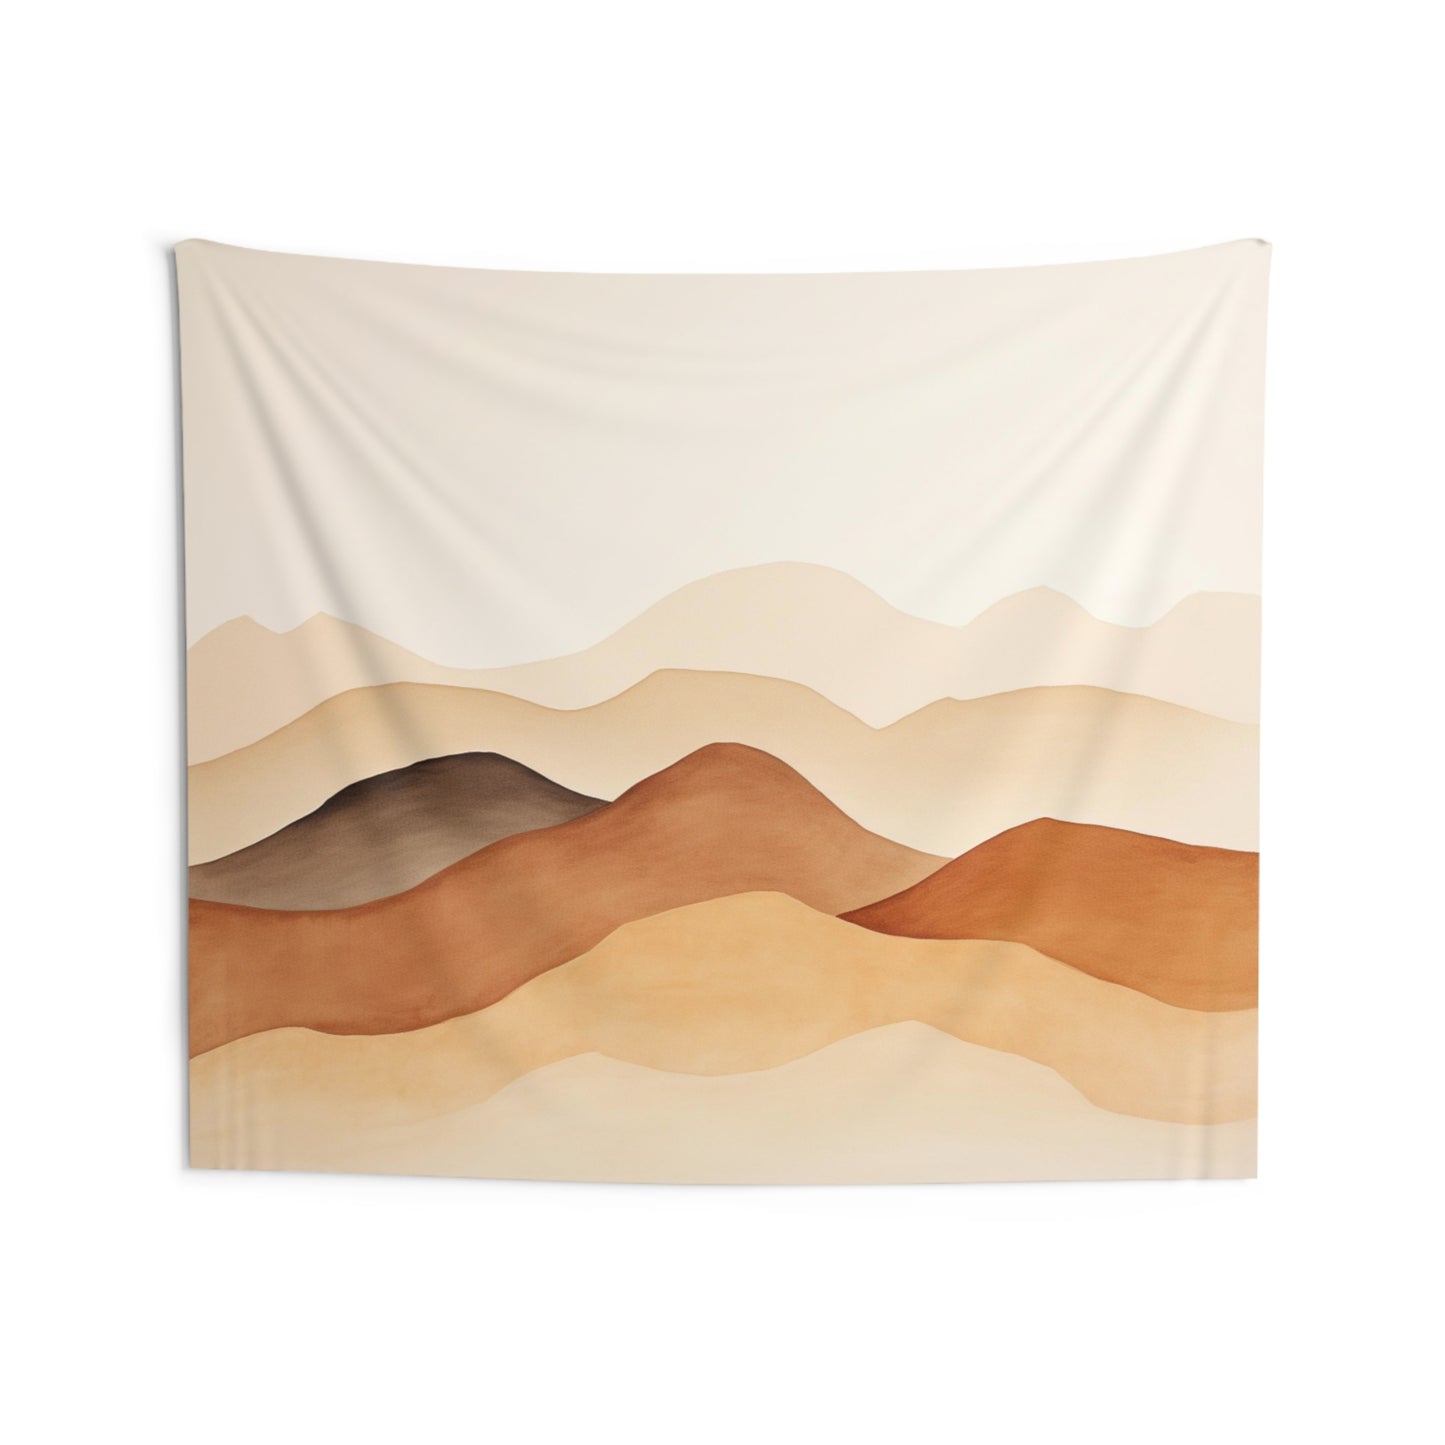 Earth Tone Tapestry, Brown Mountains minimalistic Wall Art Hanging Cool Unique Landscape Aesthetic Large Small Decor Bedroom Dorm Room Starcove Fashion